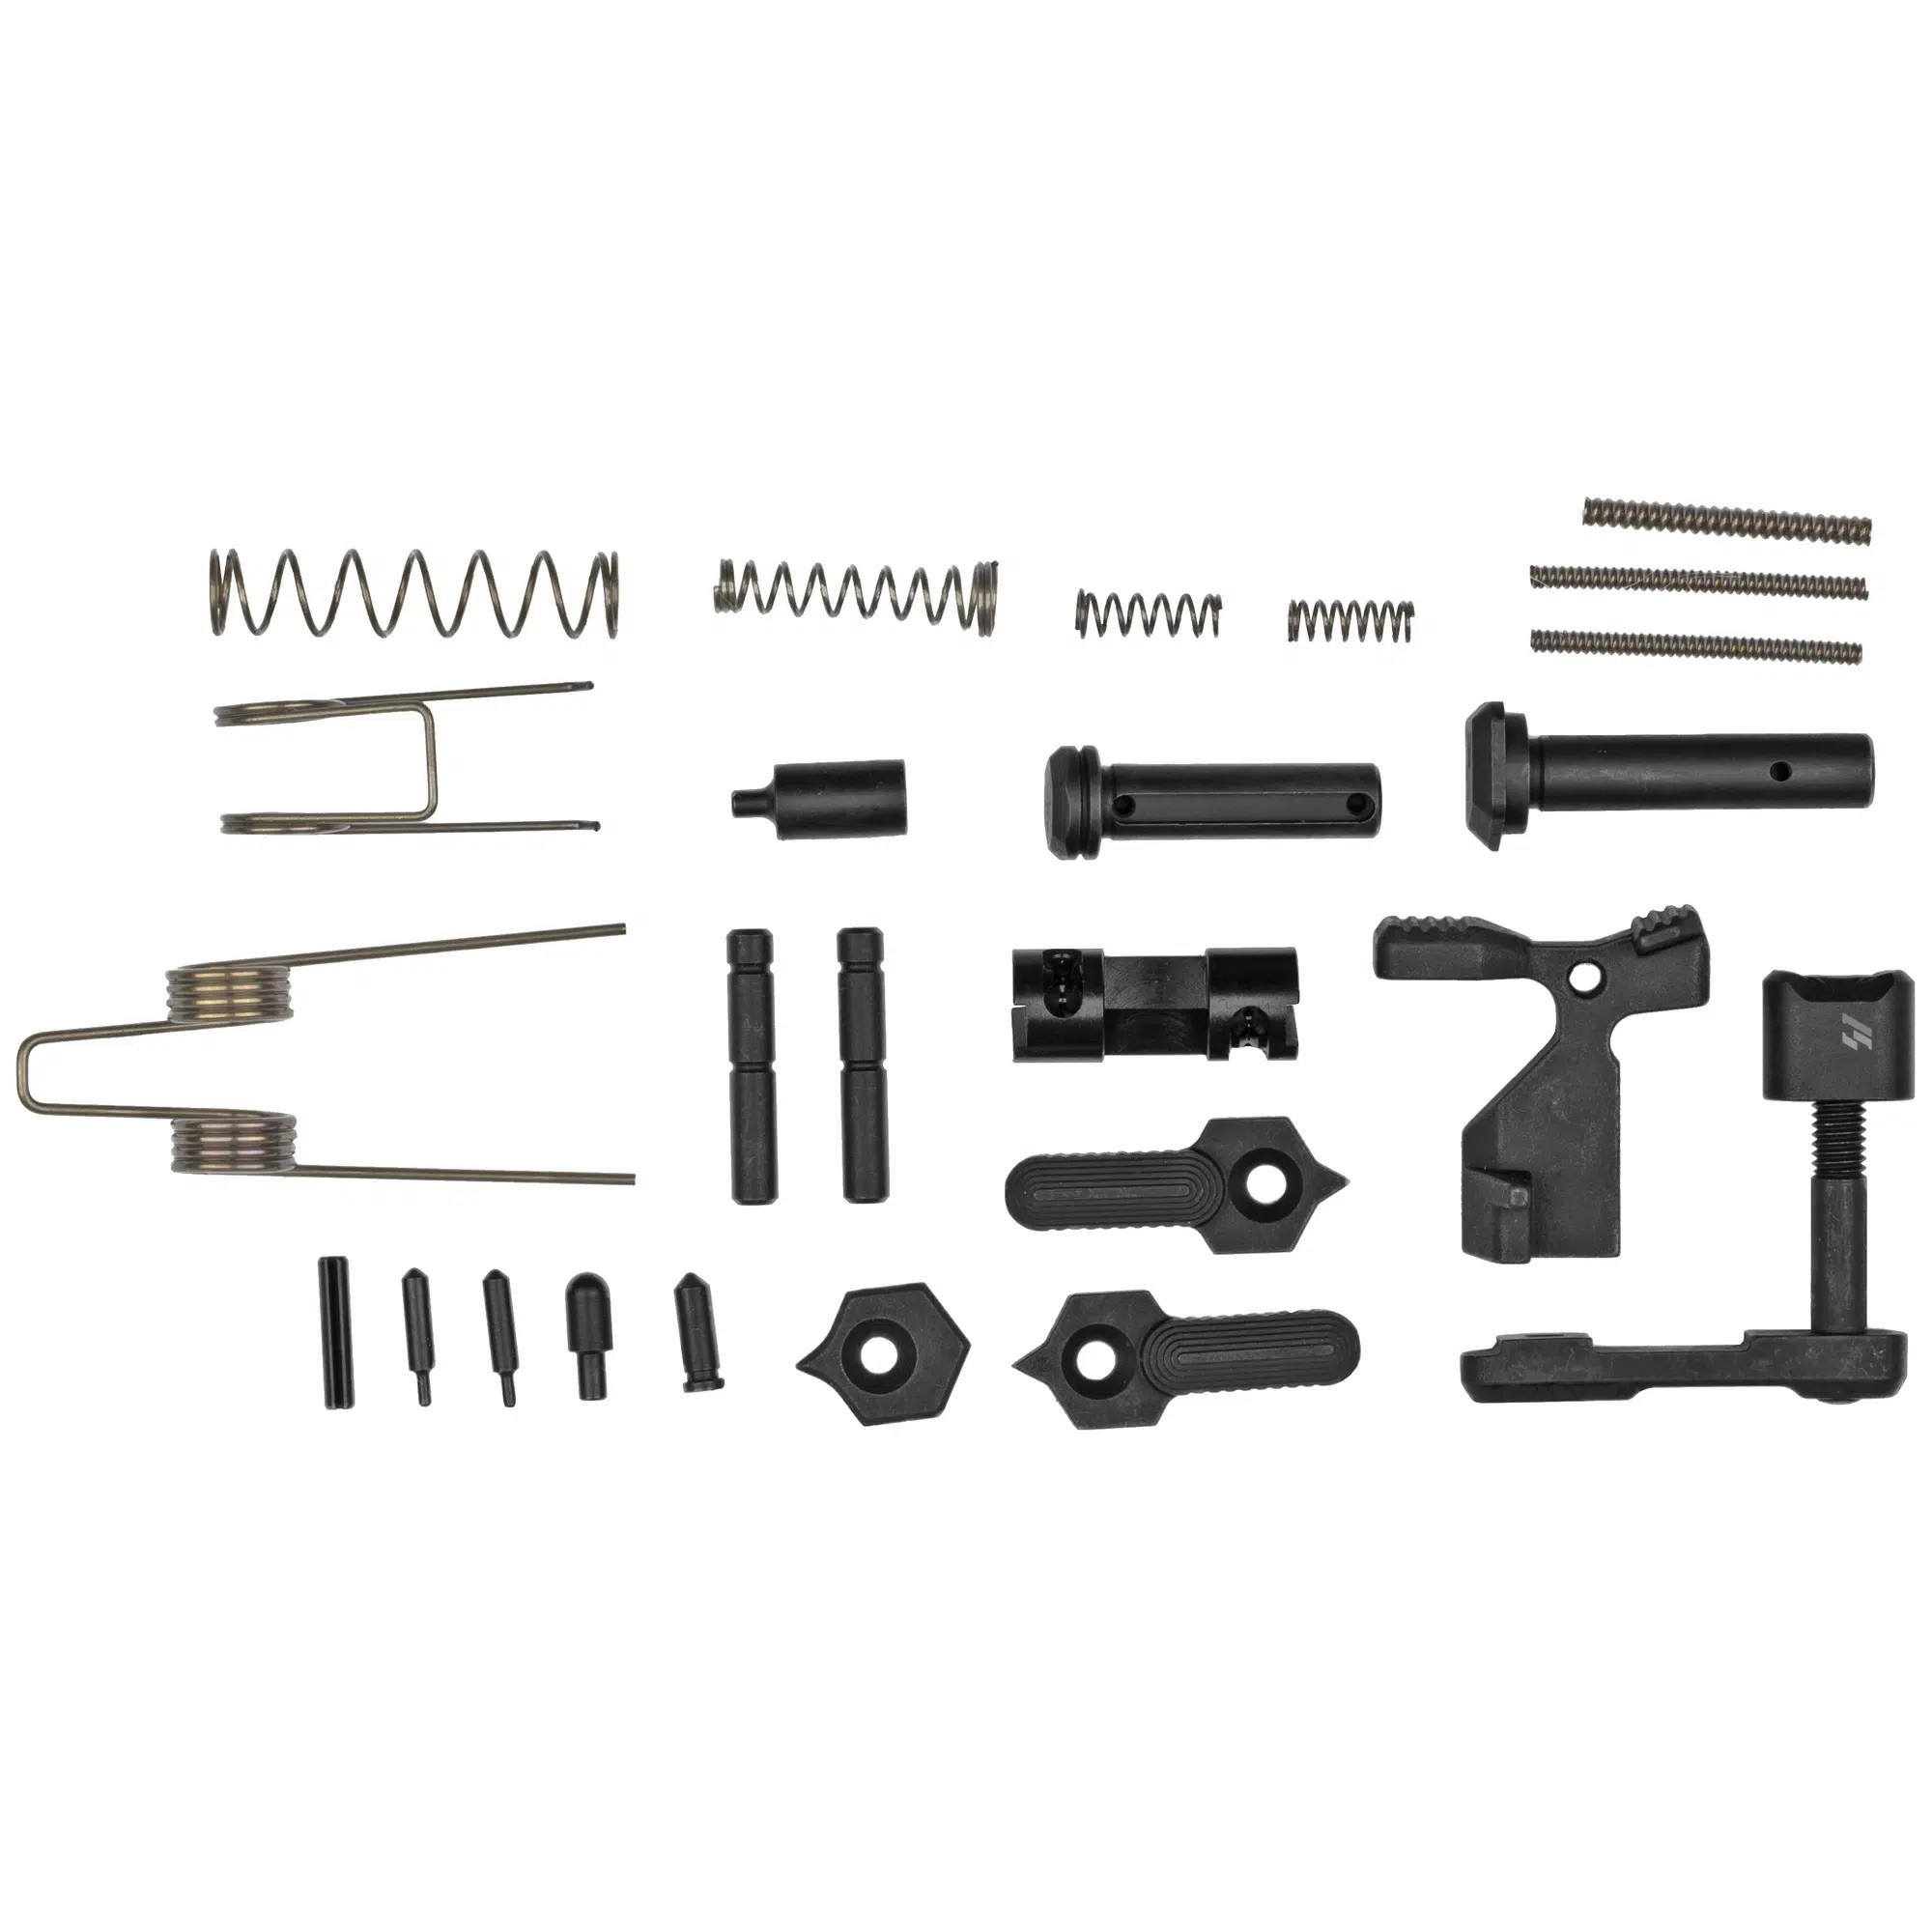 Strike Industries Enhanced AR15 Lower Parts Kit – No Fire Control Group